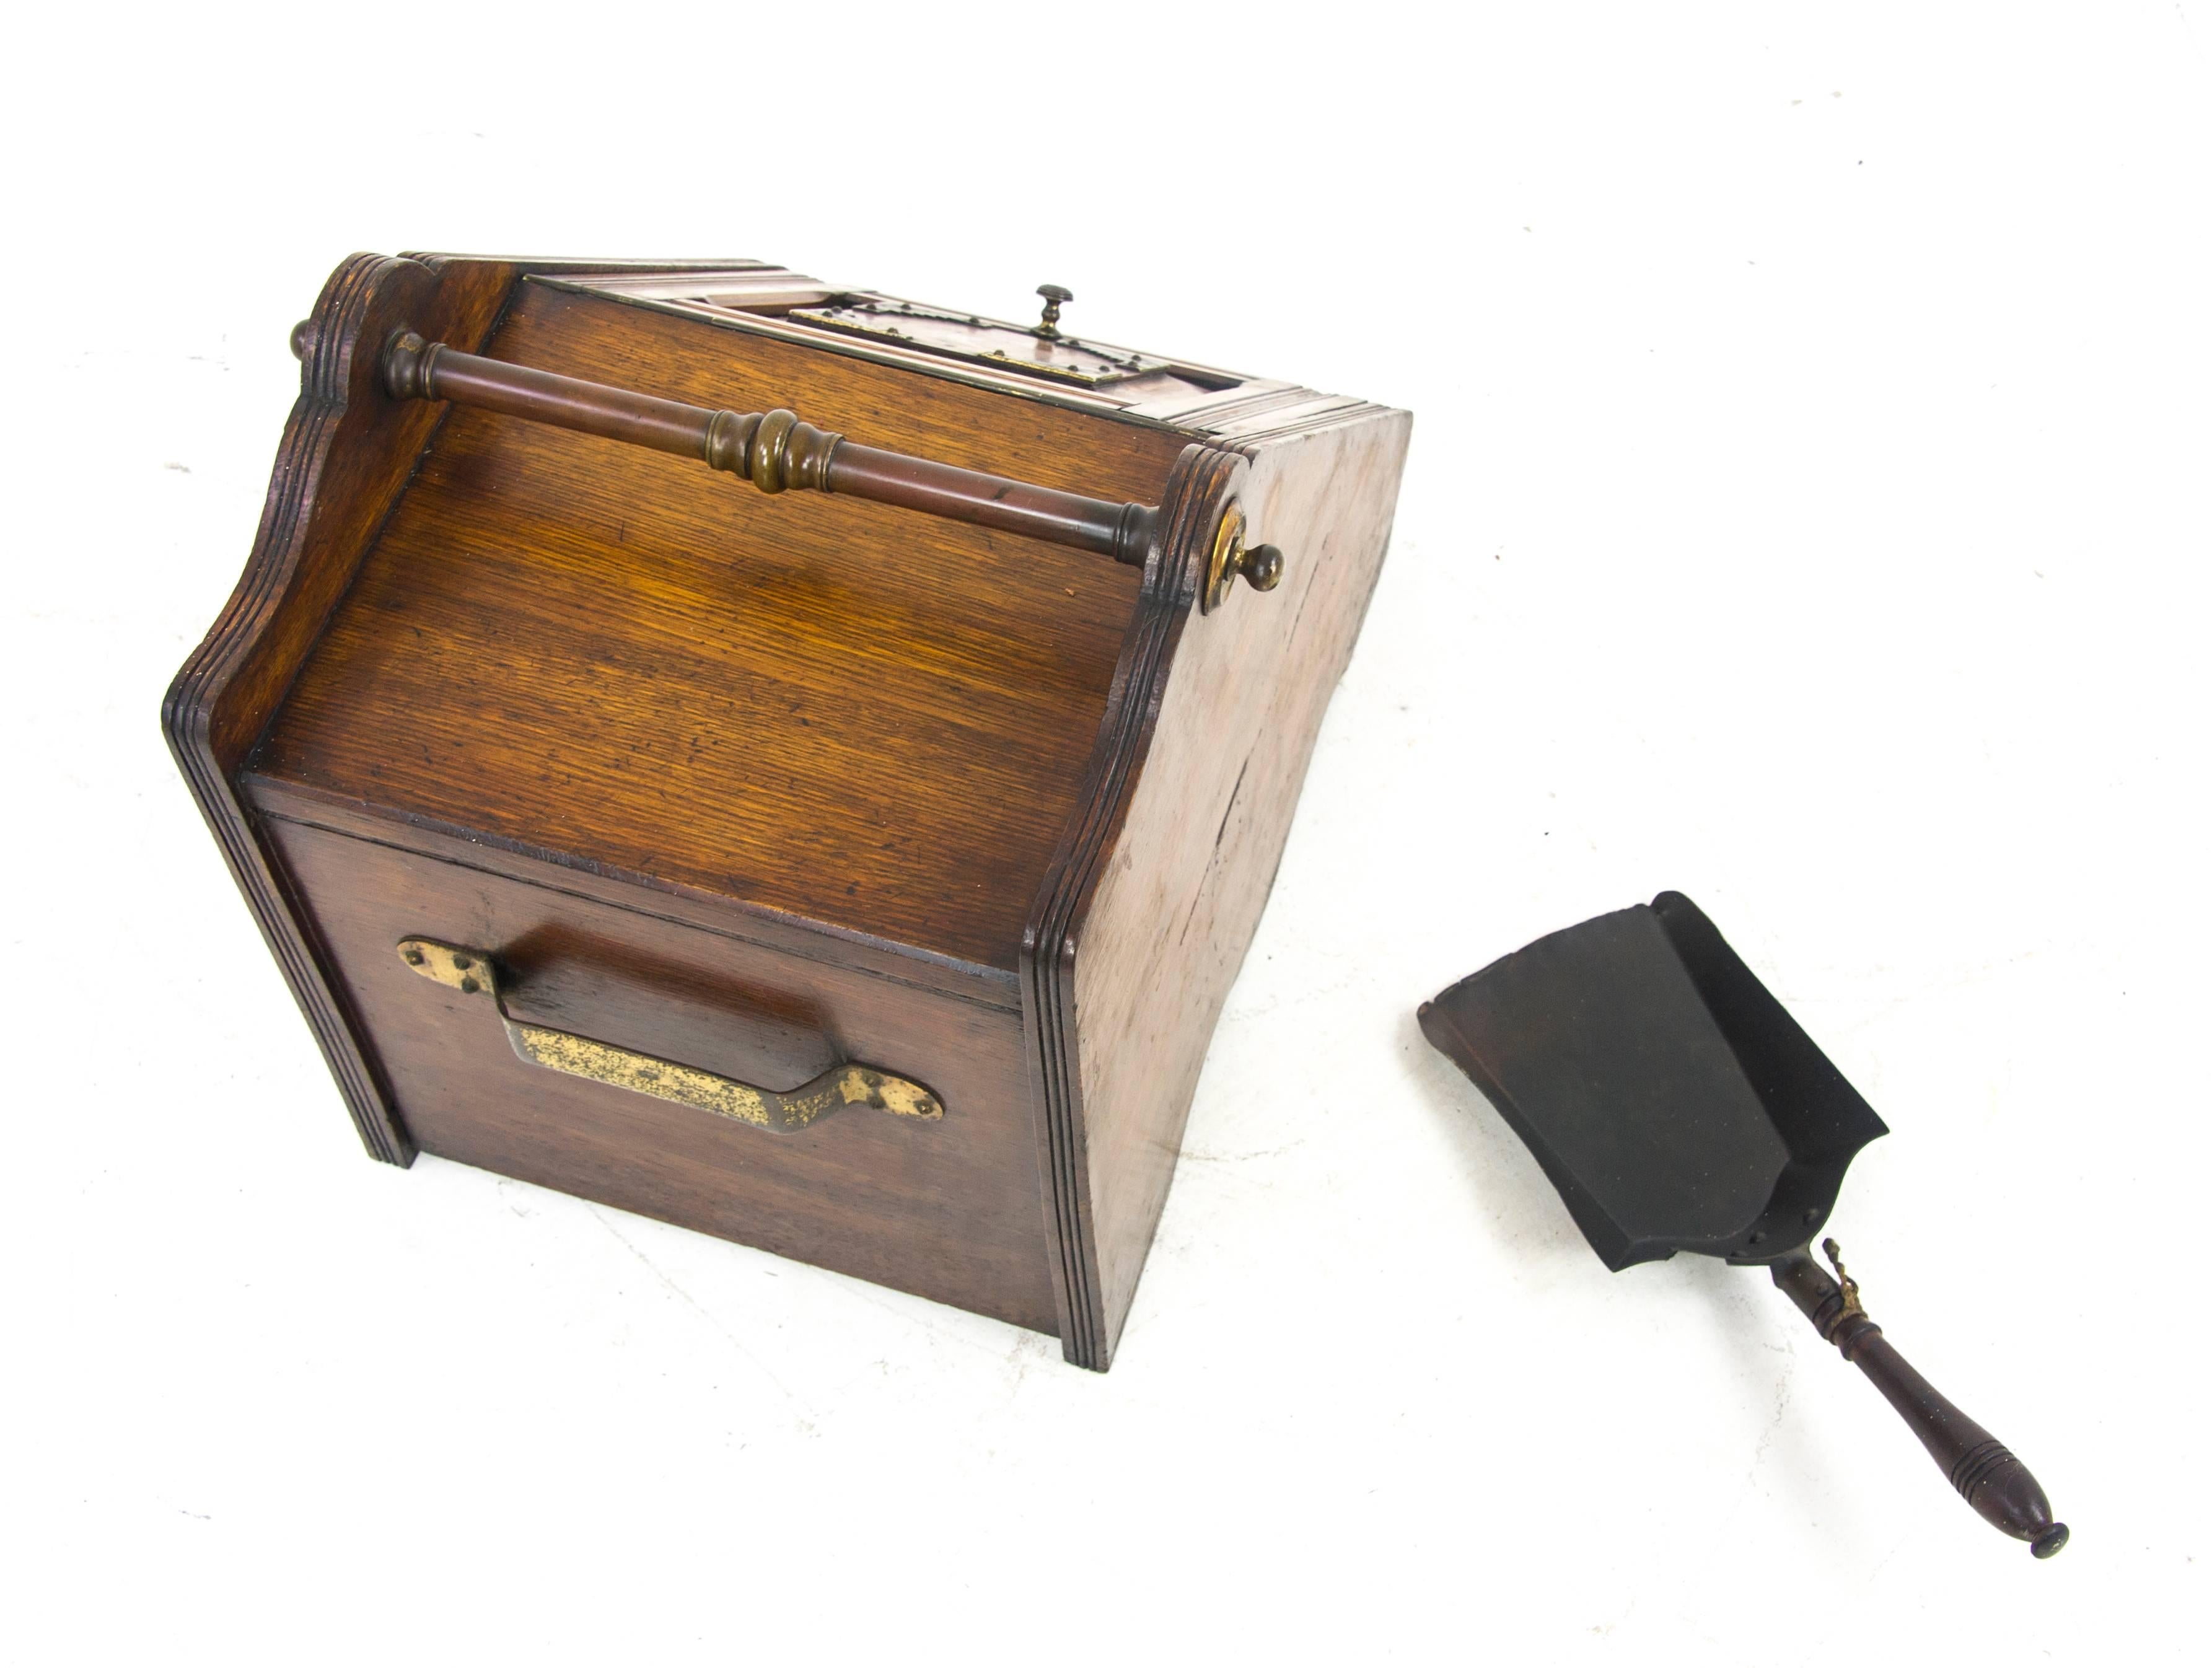 Late 19th Century Coal Scuttle, Coal Hod, Fireplace Decor, Carved Oak with Shovel, 1870, B1085